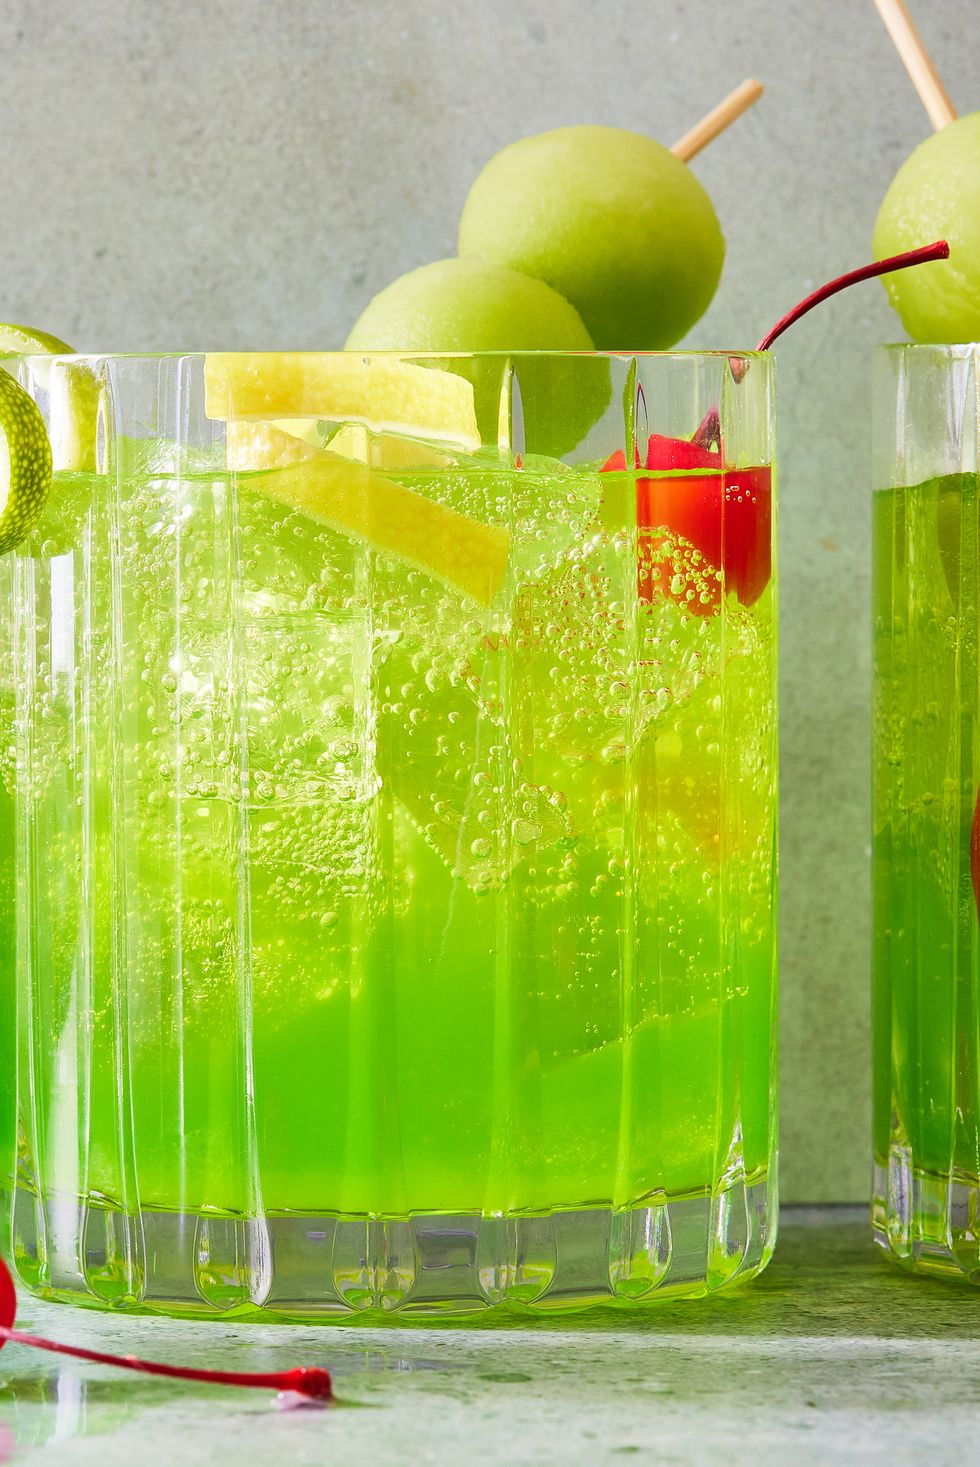 midori sour with melon balls and cherries